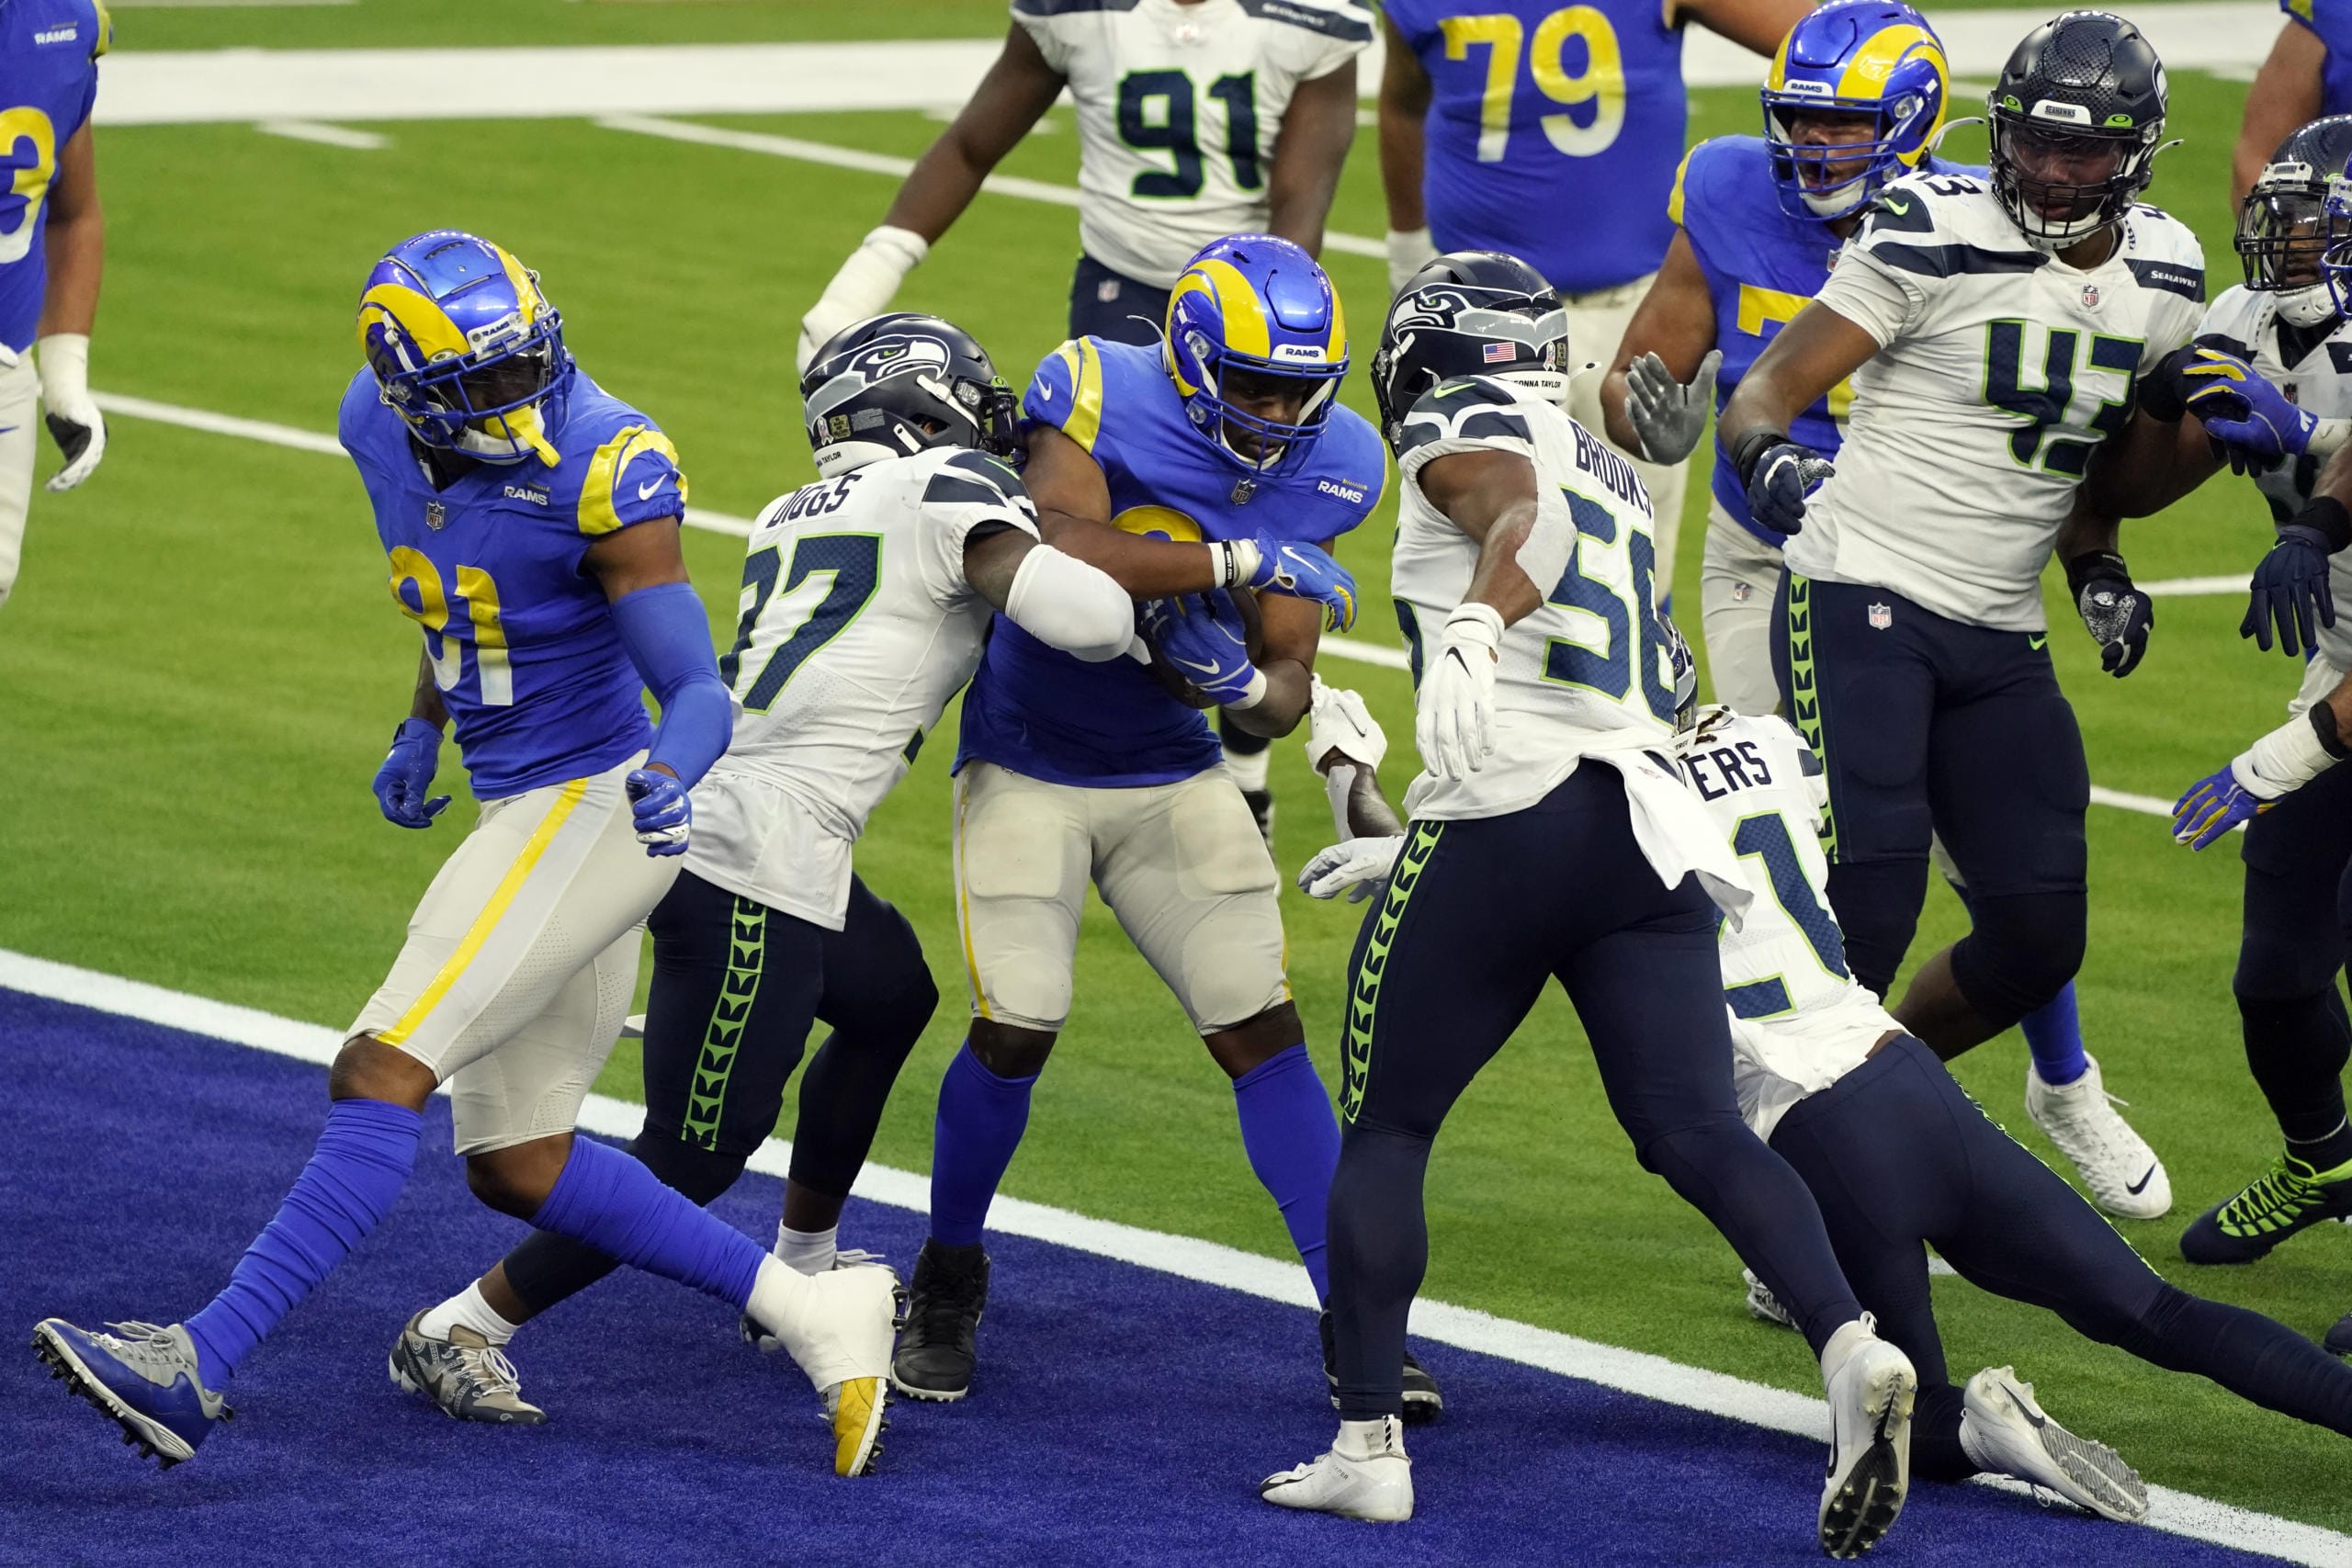 Los Angeles Rams running back Malcolm Brown, center, scores a rushing touchdown against the Seattle Seahawks during the second half of an NFL football game Sunday, Nov. 15, 2020, in Inglewood, Calif.